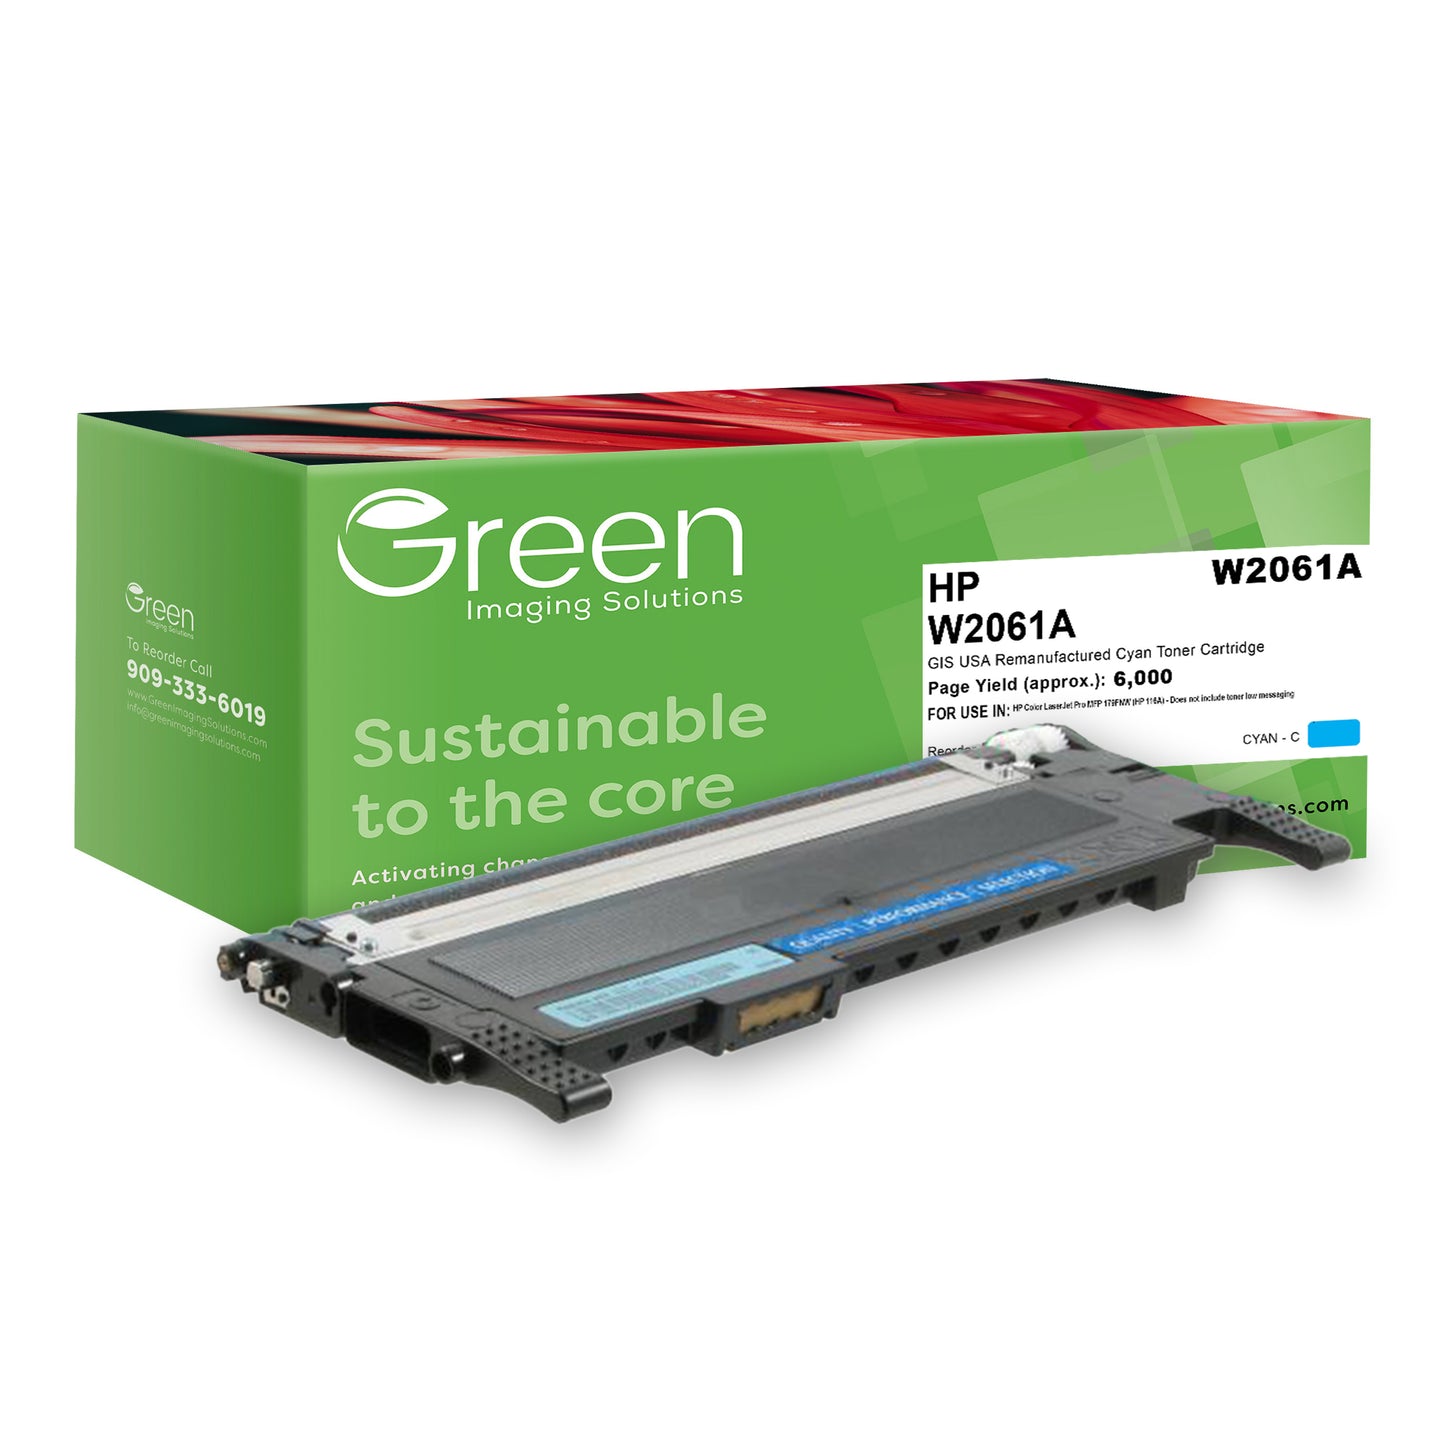 Green Imaging Solutions USA Remanufactured Cyan Toner Cartridge (Reused OEM Chip) for HP 116A (HP W2061A)